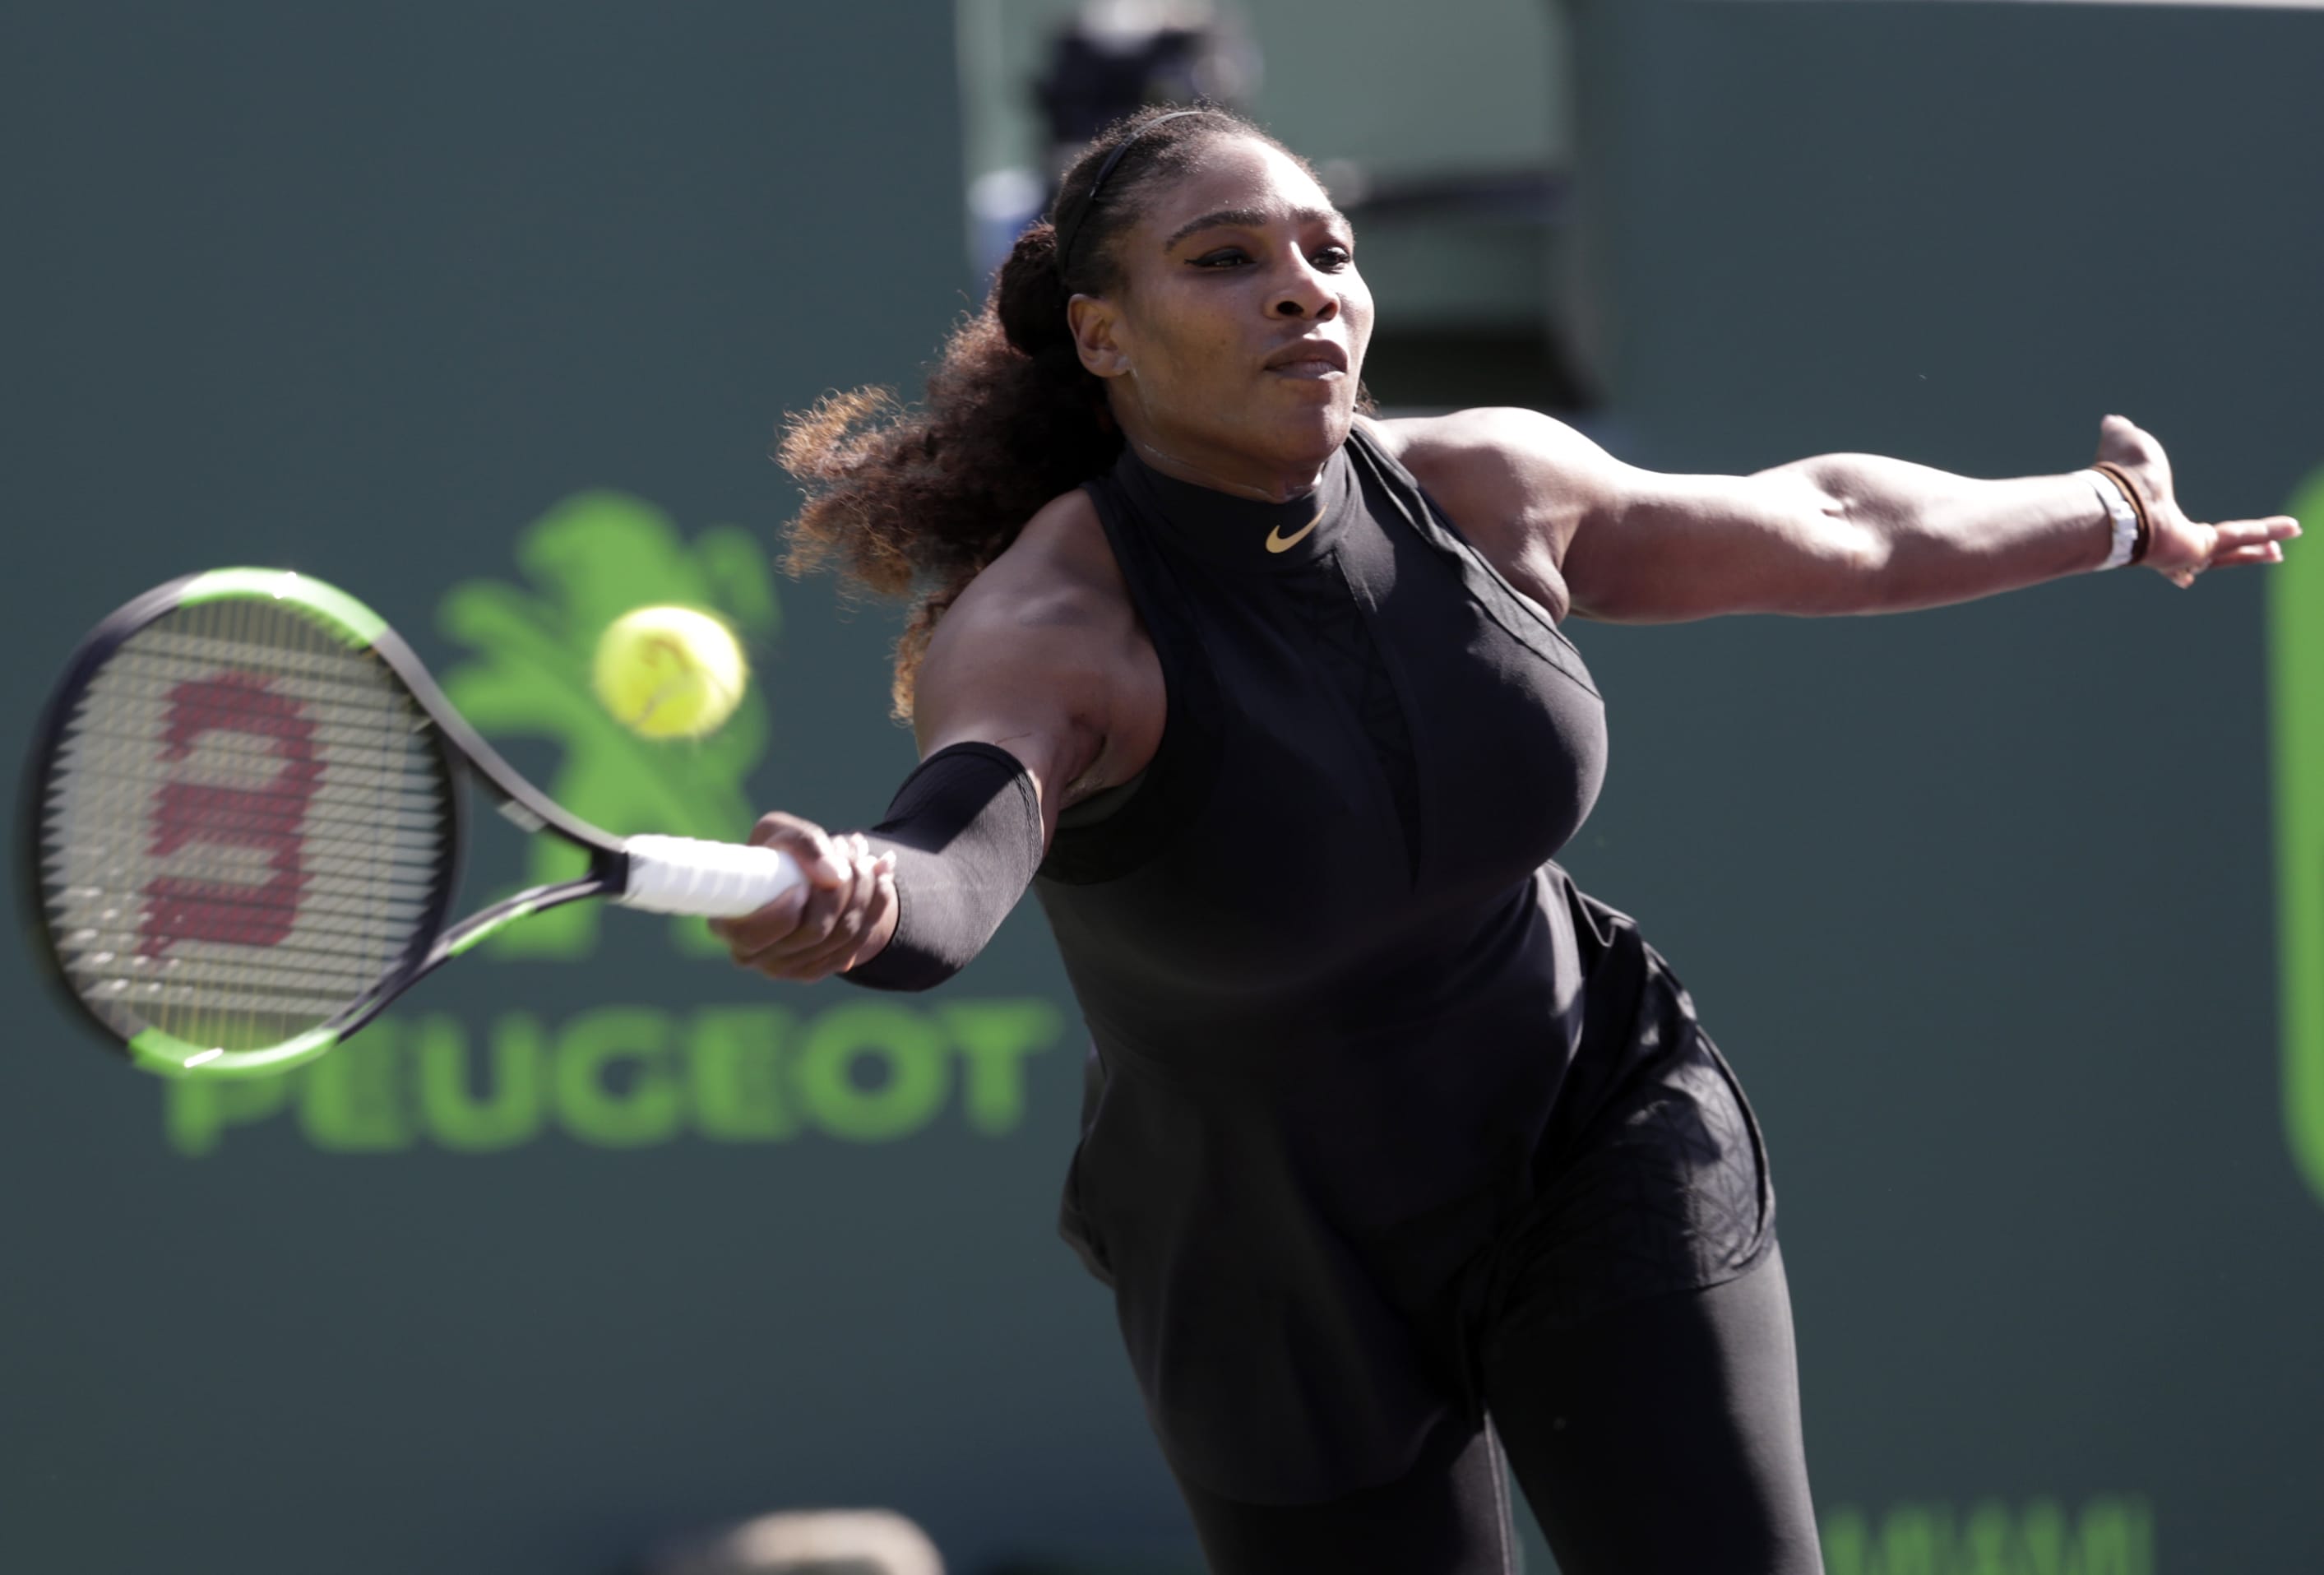 Several of Serena Williams' biggest rivals believe that the 23-time Grand Slam champion deserves more than just a guaranteed spot in the French Open draw. Williams, who is expected to play her first major since returning from maternity leave, should also receive a top seed that befits the No. 1 ranking she held when she left the tour, the players say.